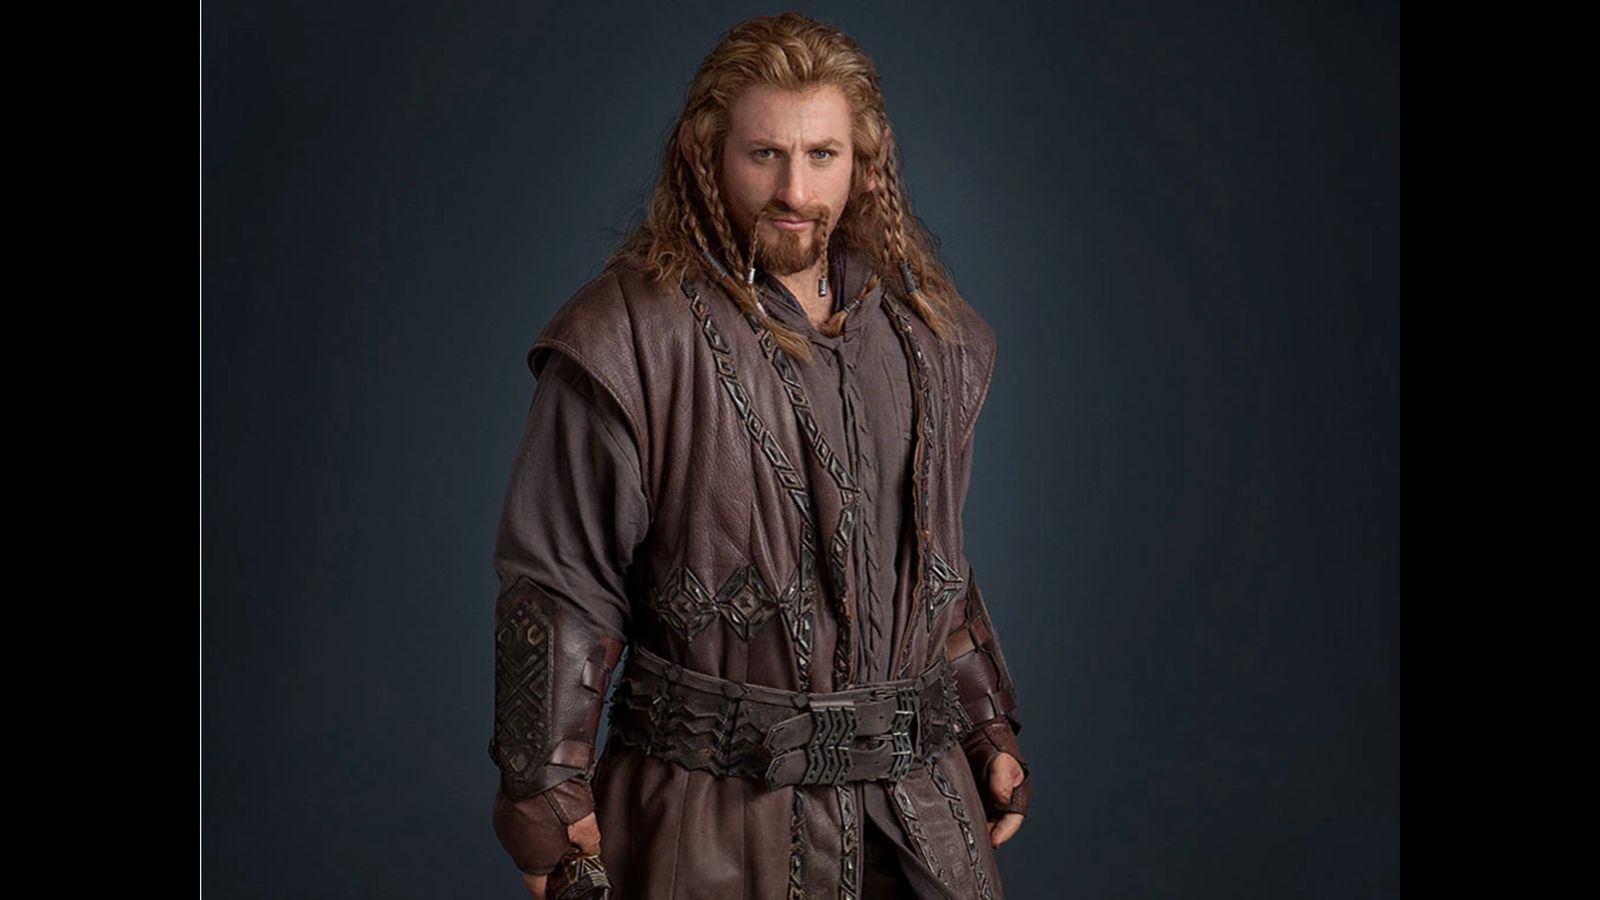 Fili one of the secondary protagonists in The Hobbit by Tolkien